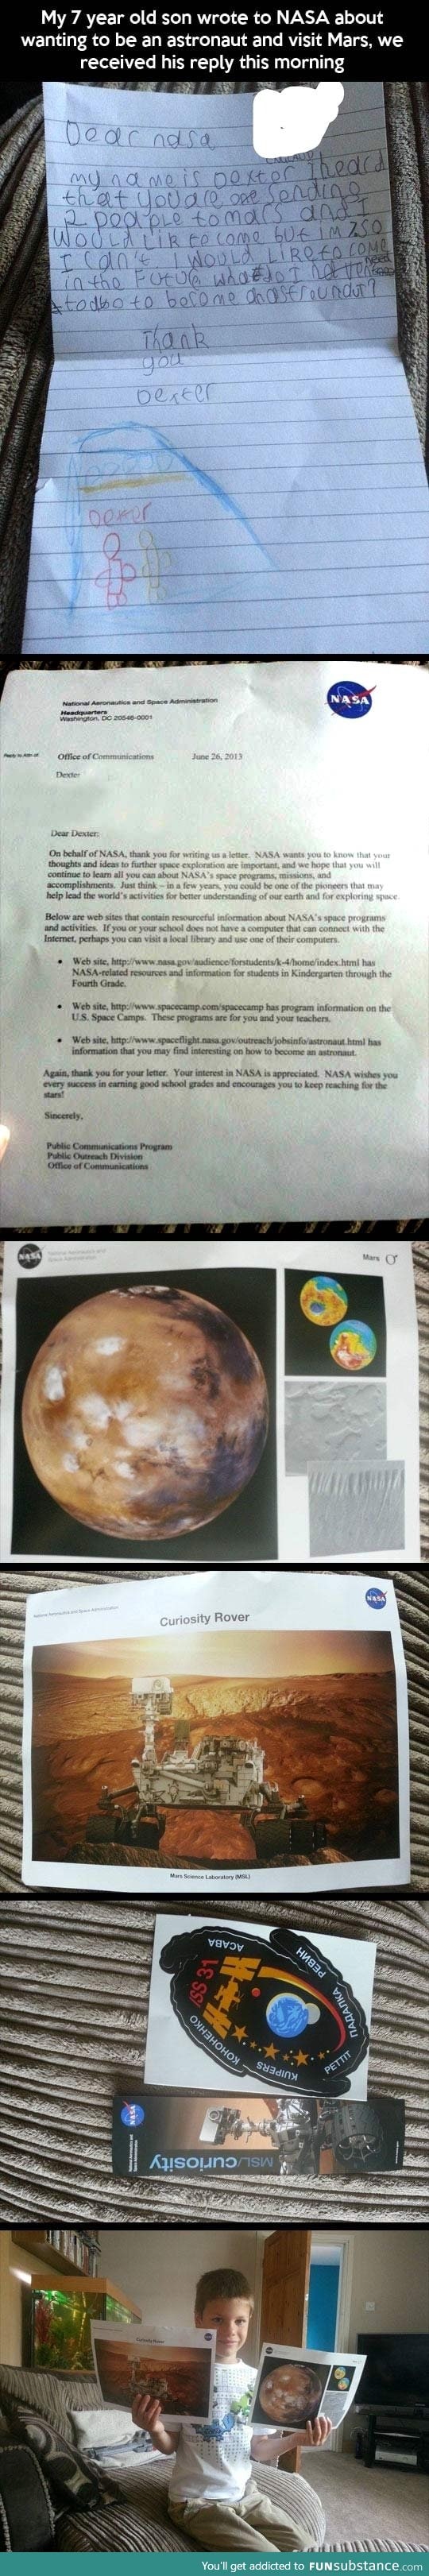 A little boy's letter to nasa